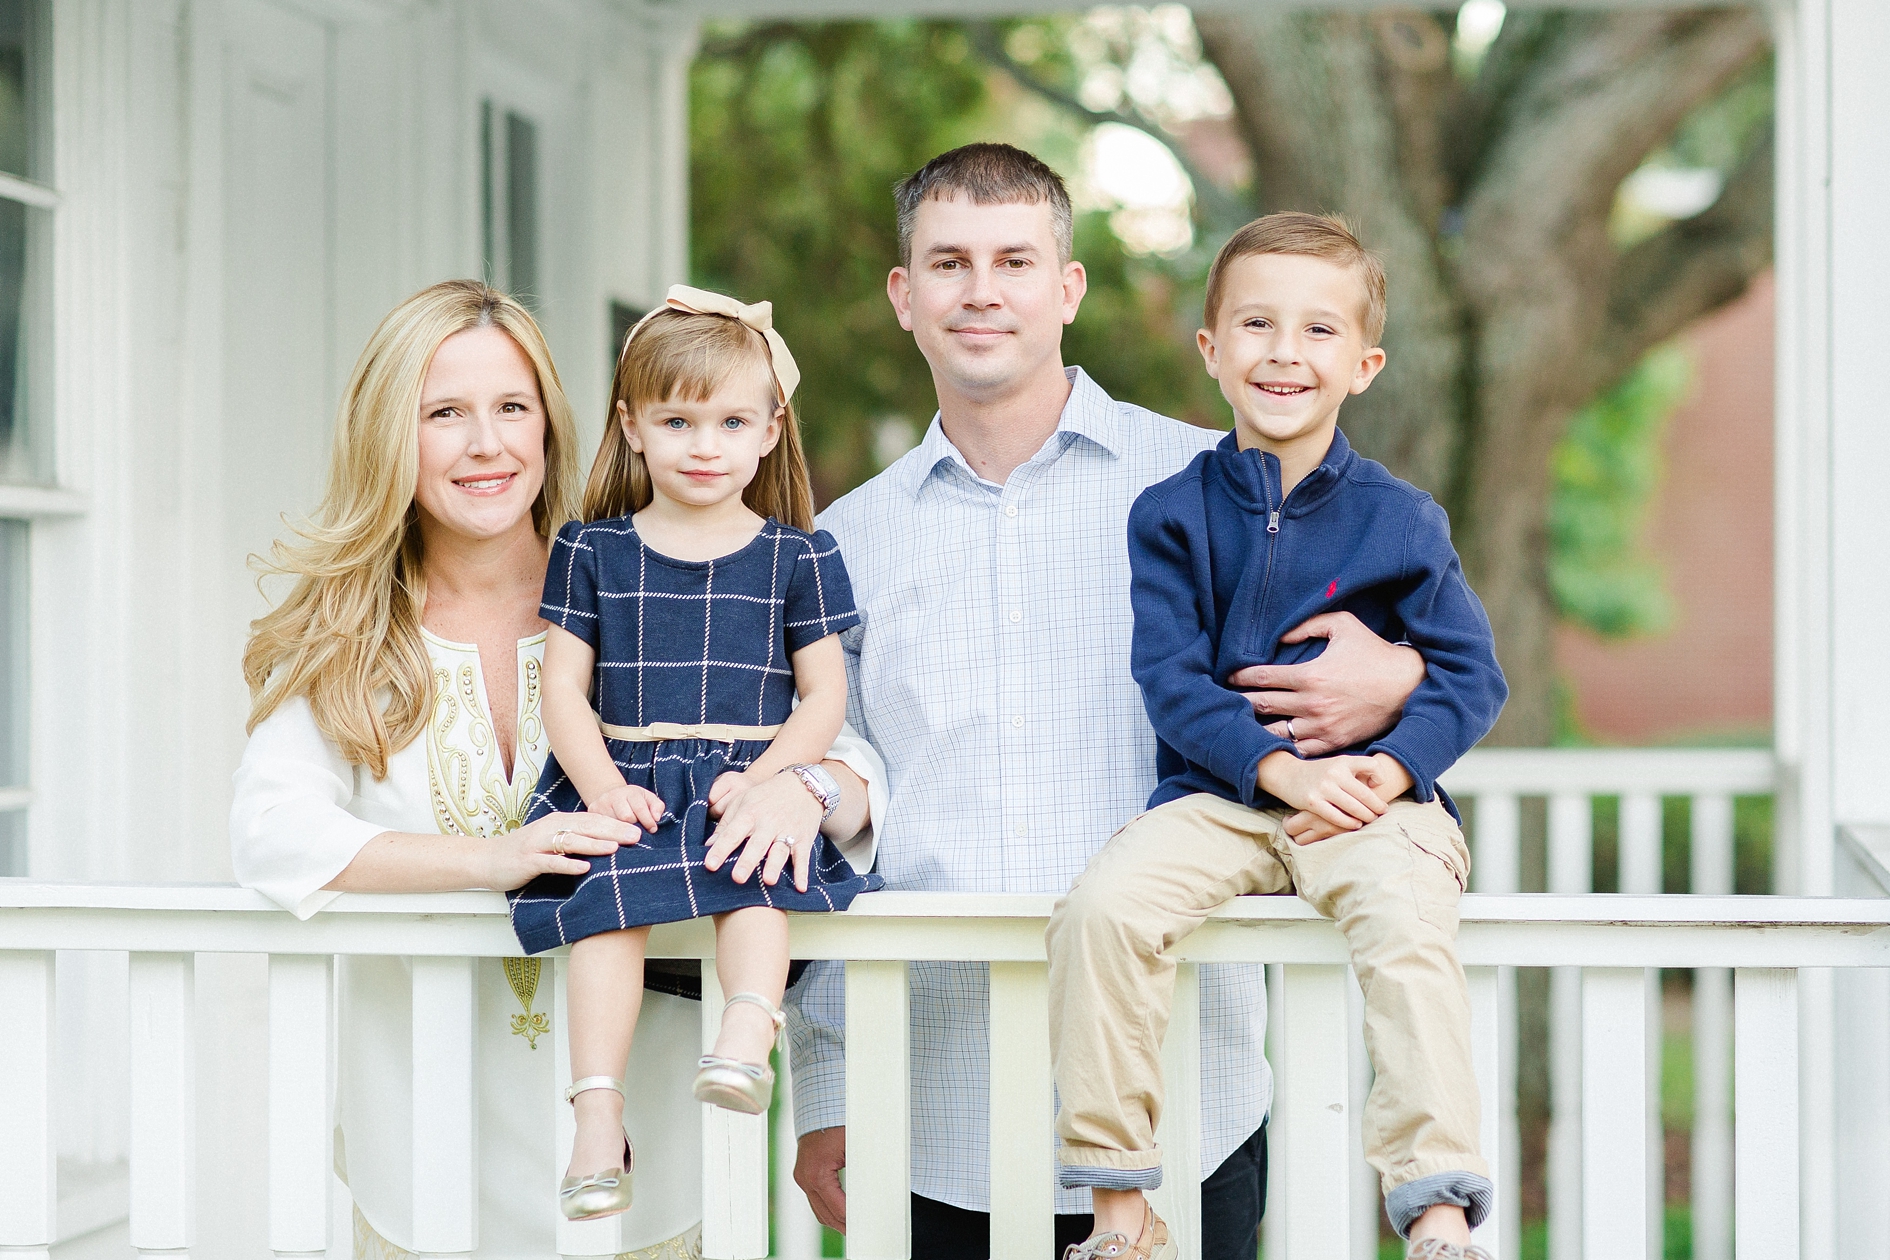 South Tampa Family Photographer | © Ailyn La Torre Photography 2016